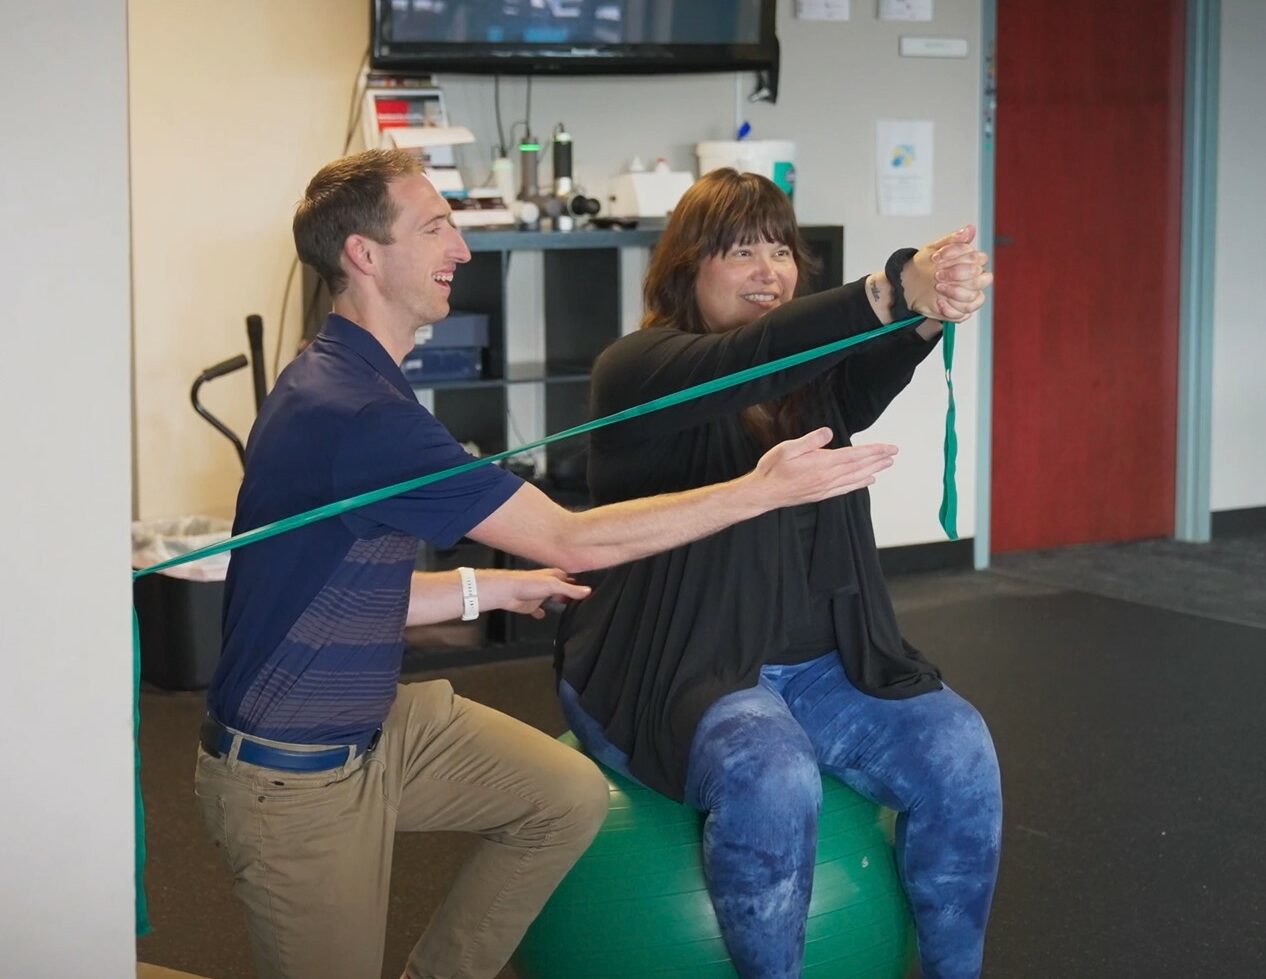 When patients share their interests and hobbies with their physical therapist, exercises can be designed to be fun and get them back to their passions